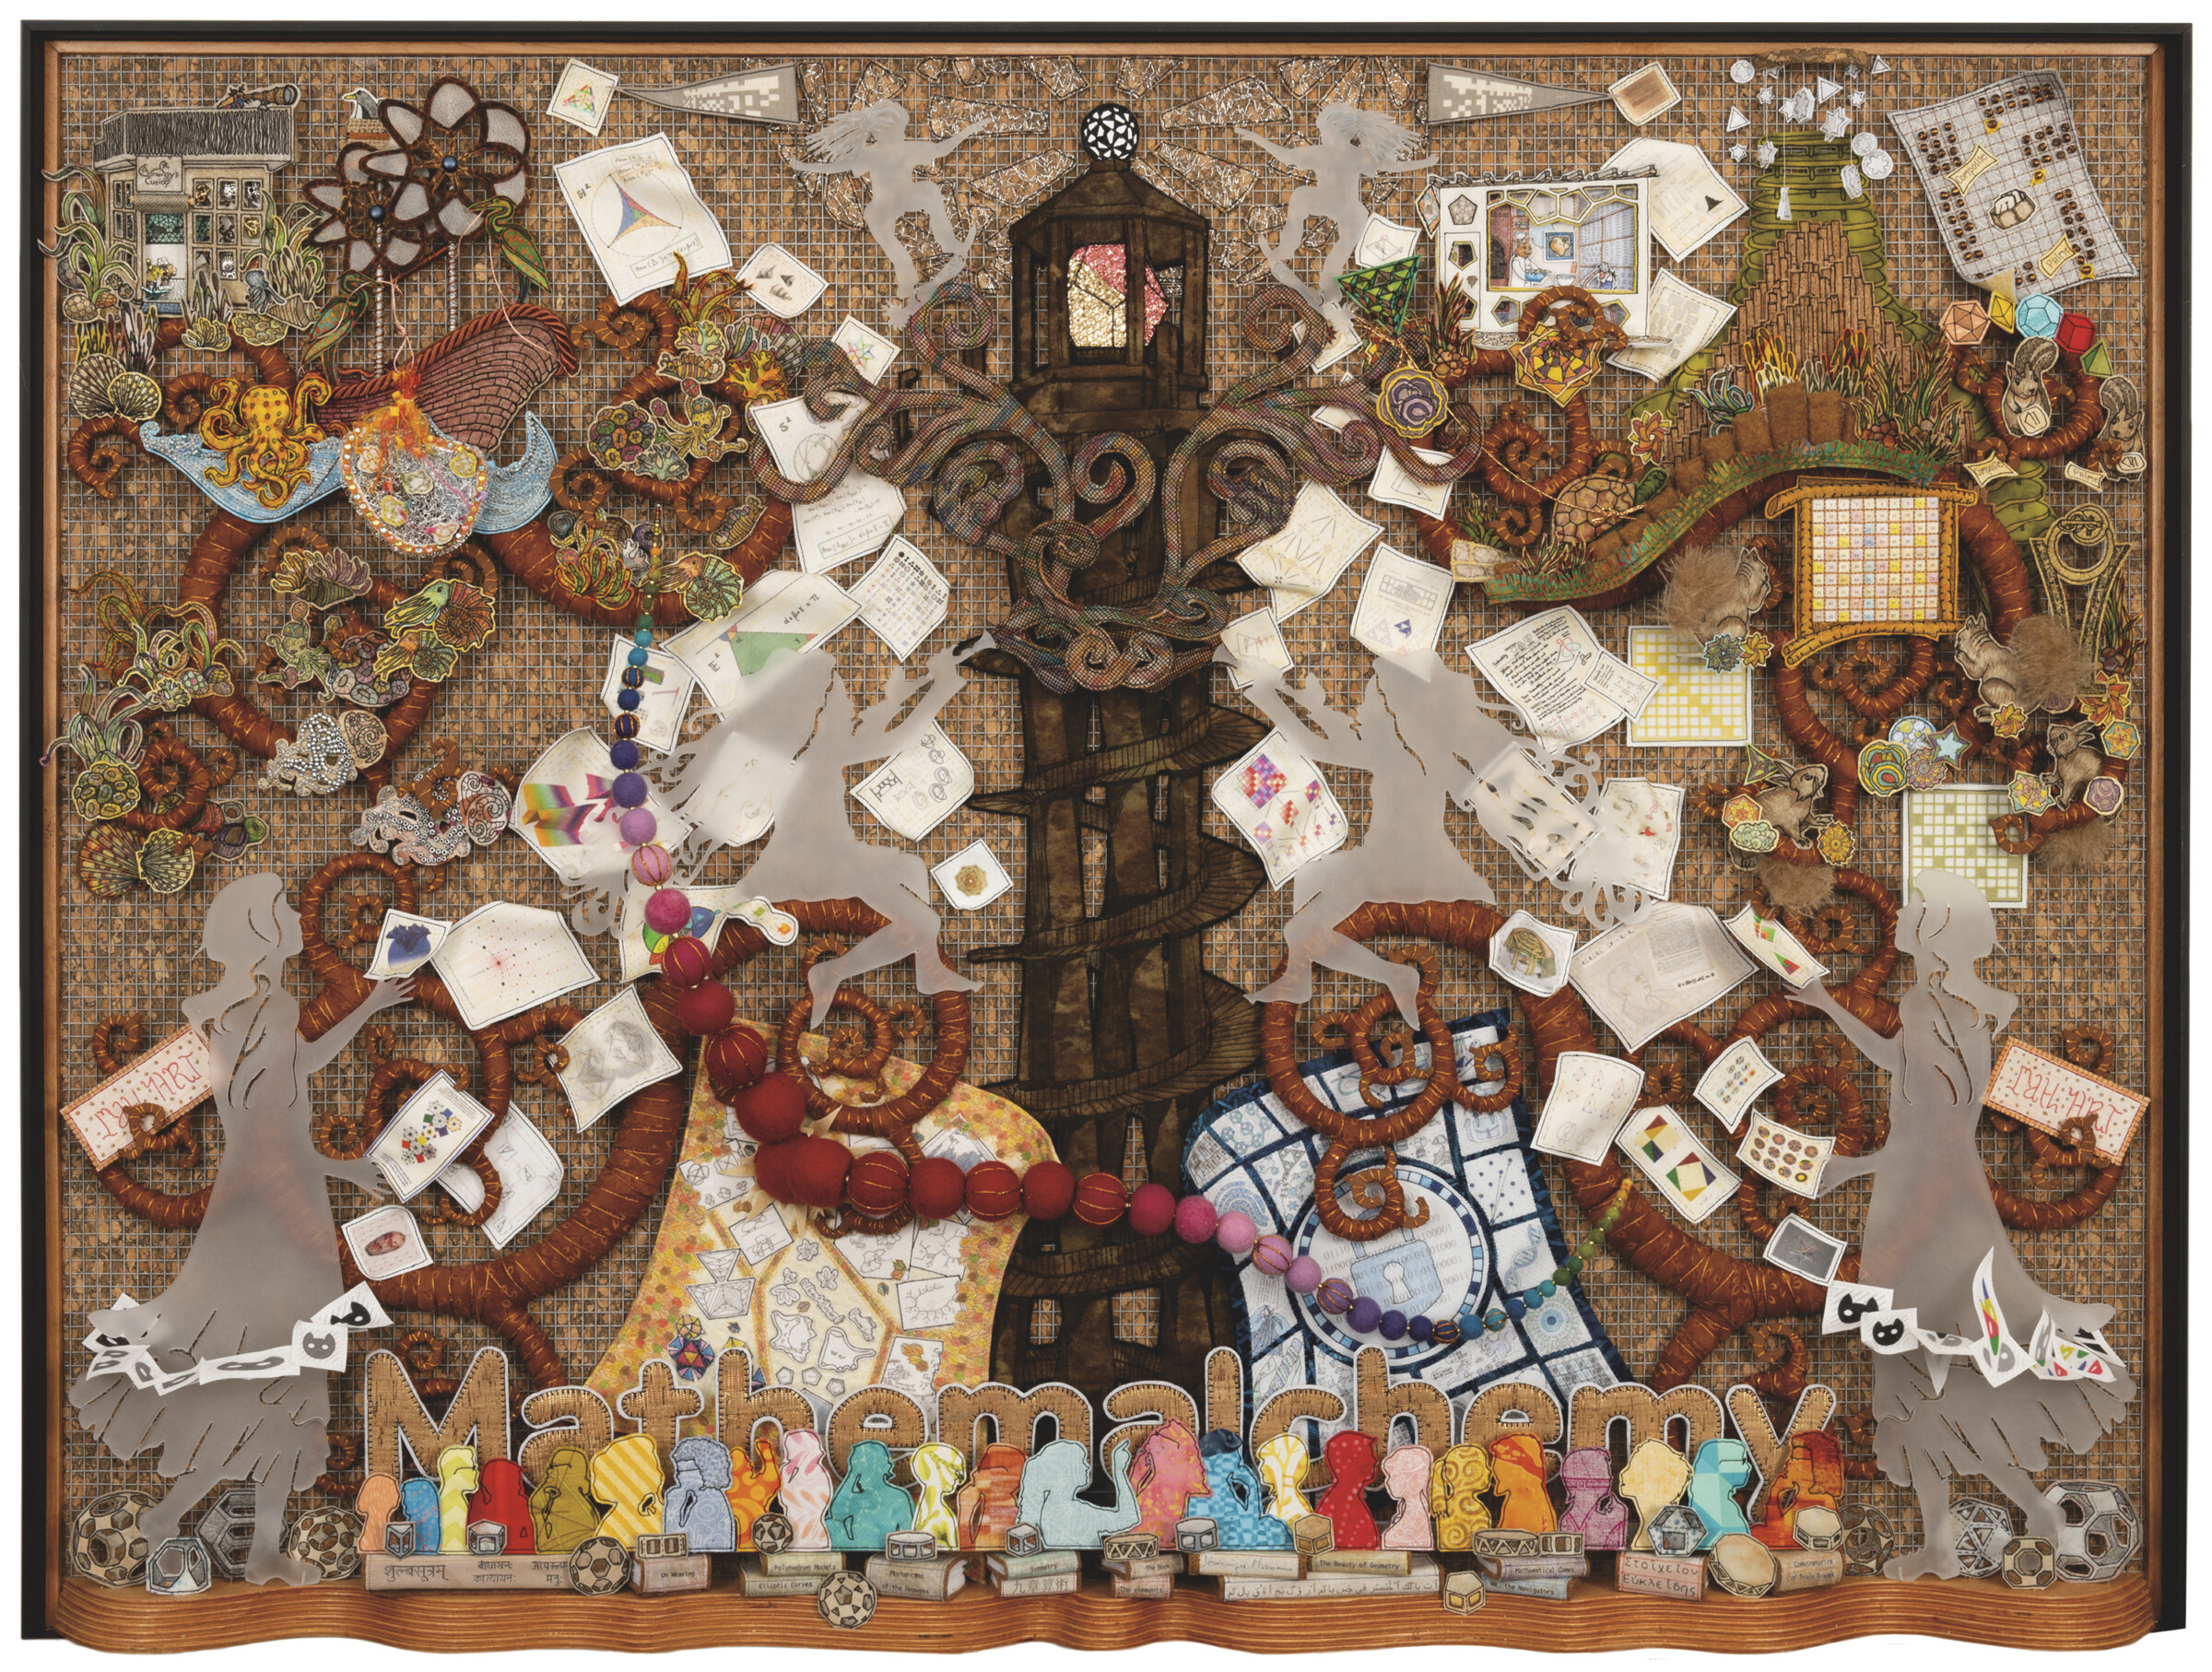 Collaborate - Issue 18 Magazine with Gallery of Quilts and